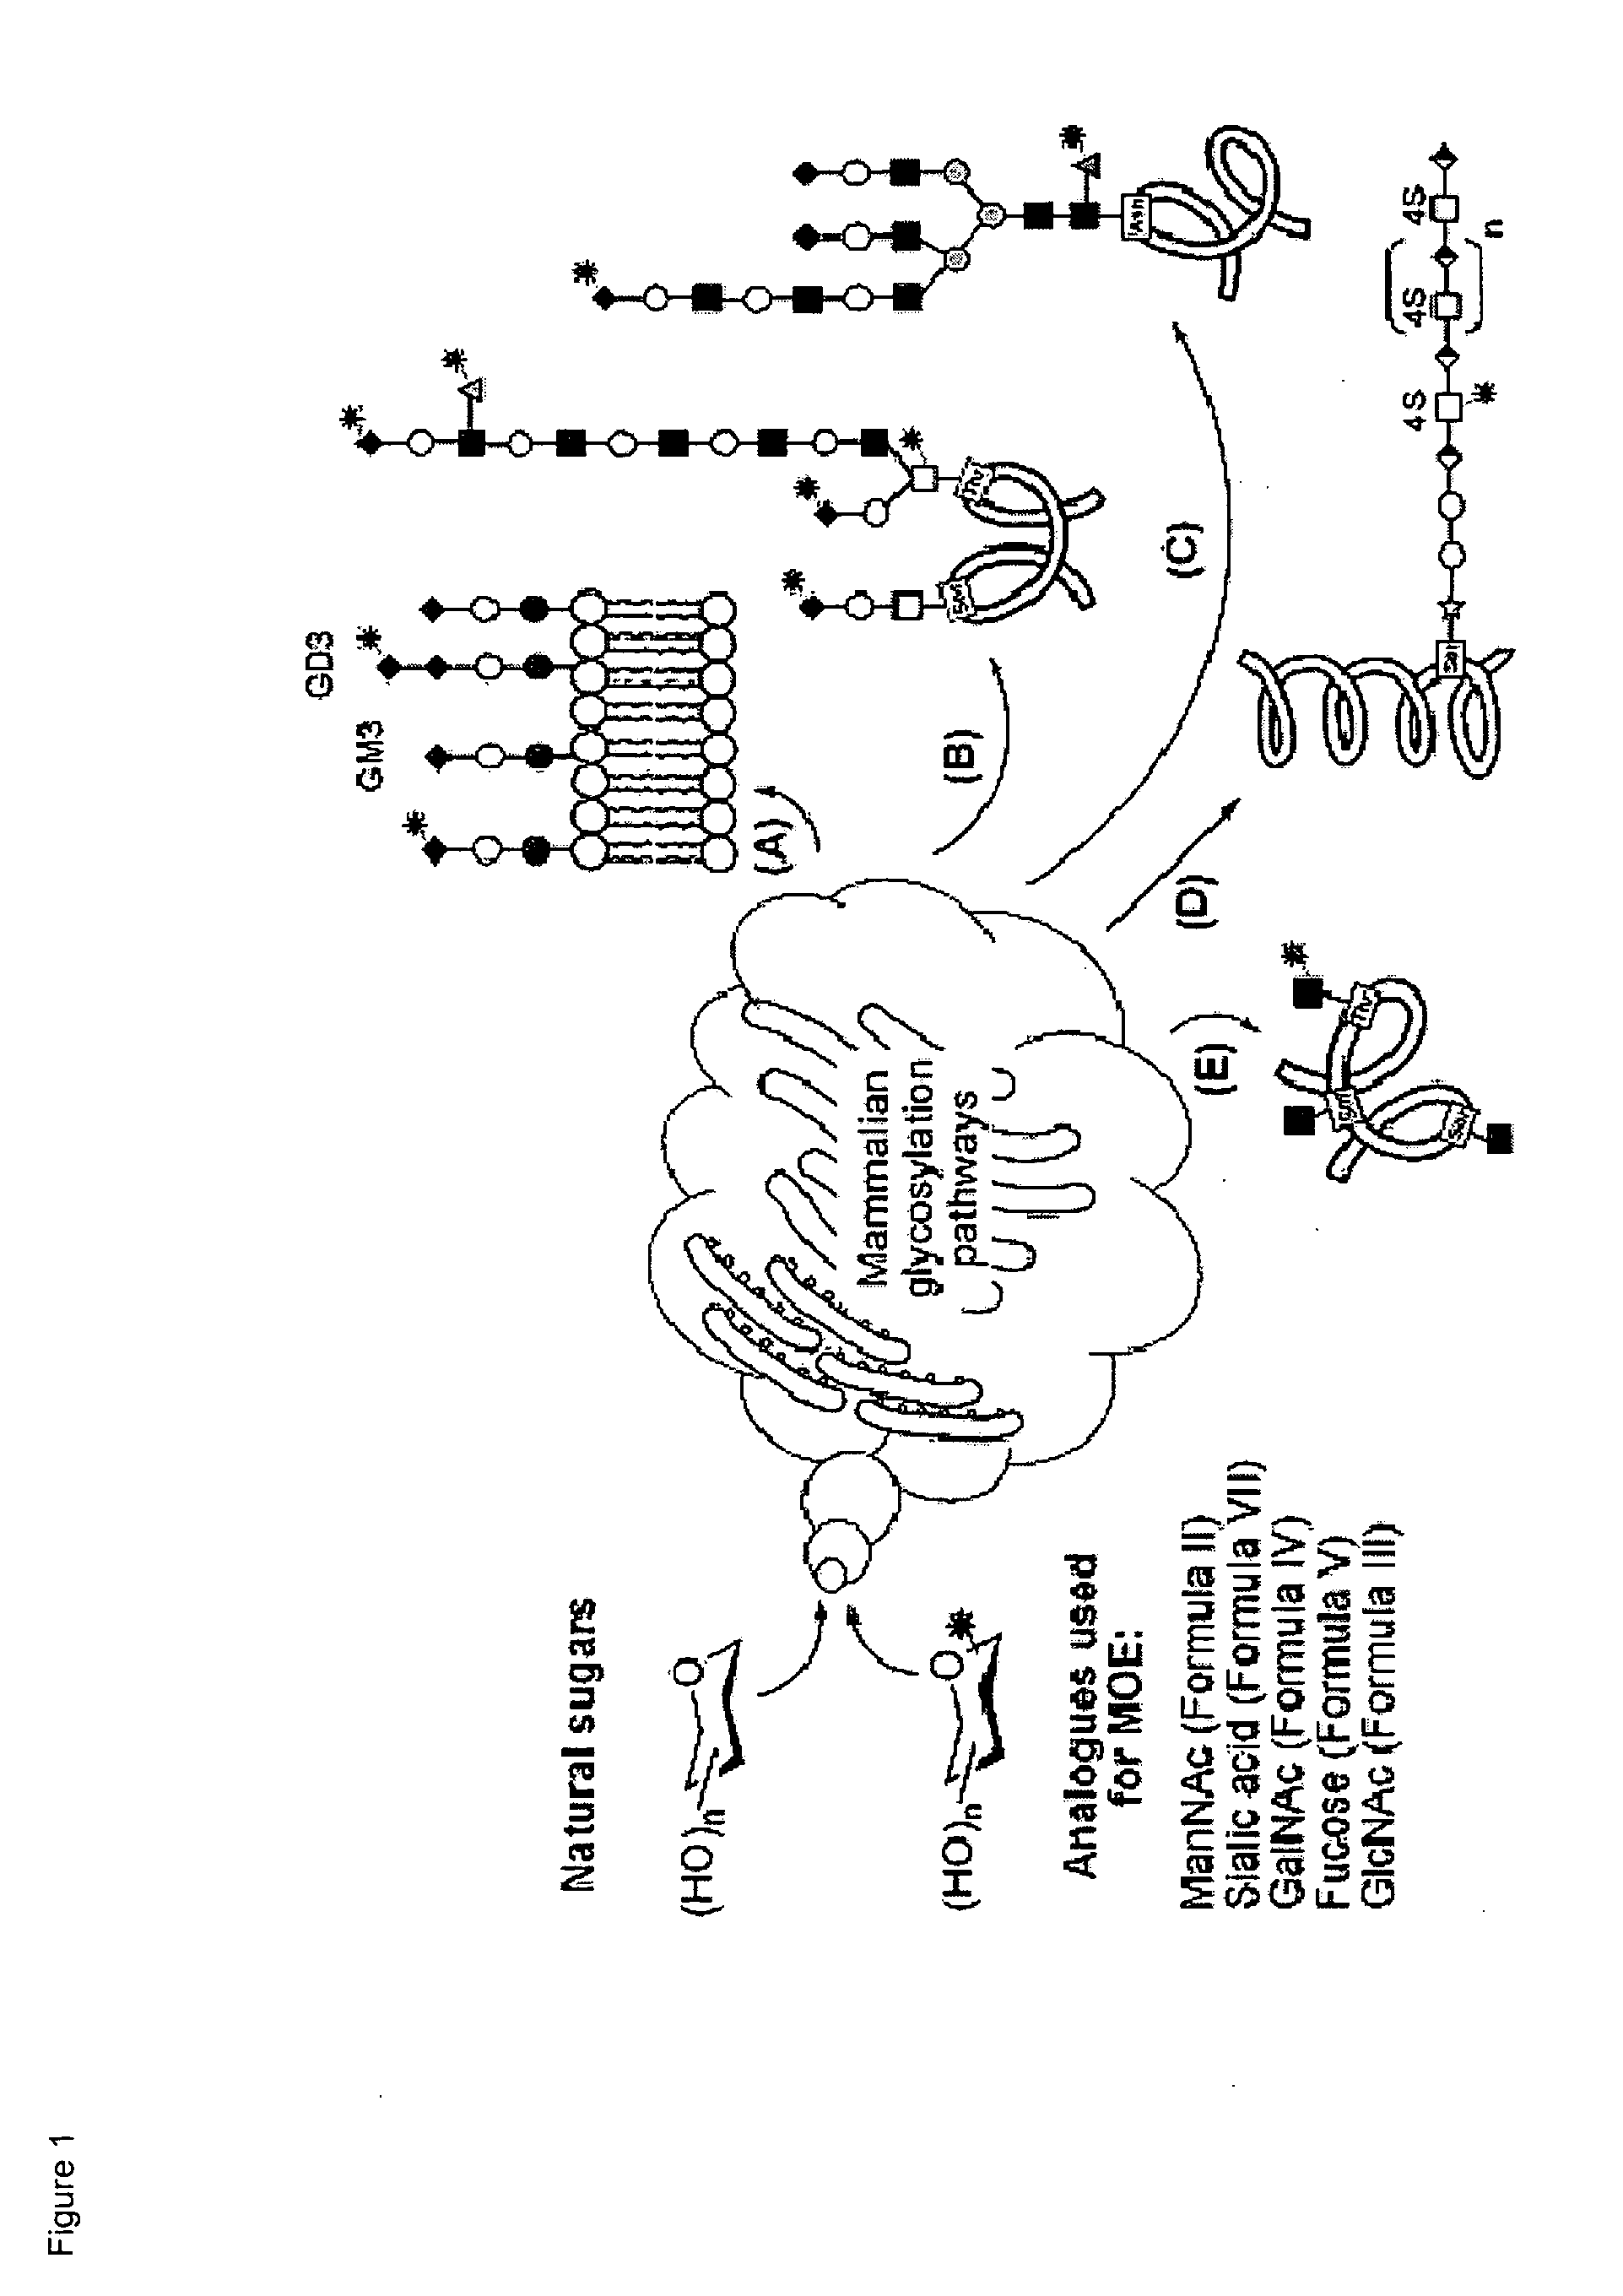 Hybrid scfa-hydroxyl-derivatized monosaccharides, methods of synthesis, and methods of treating disorders